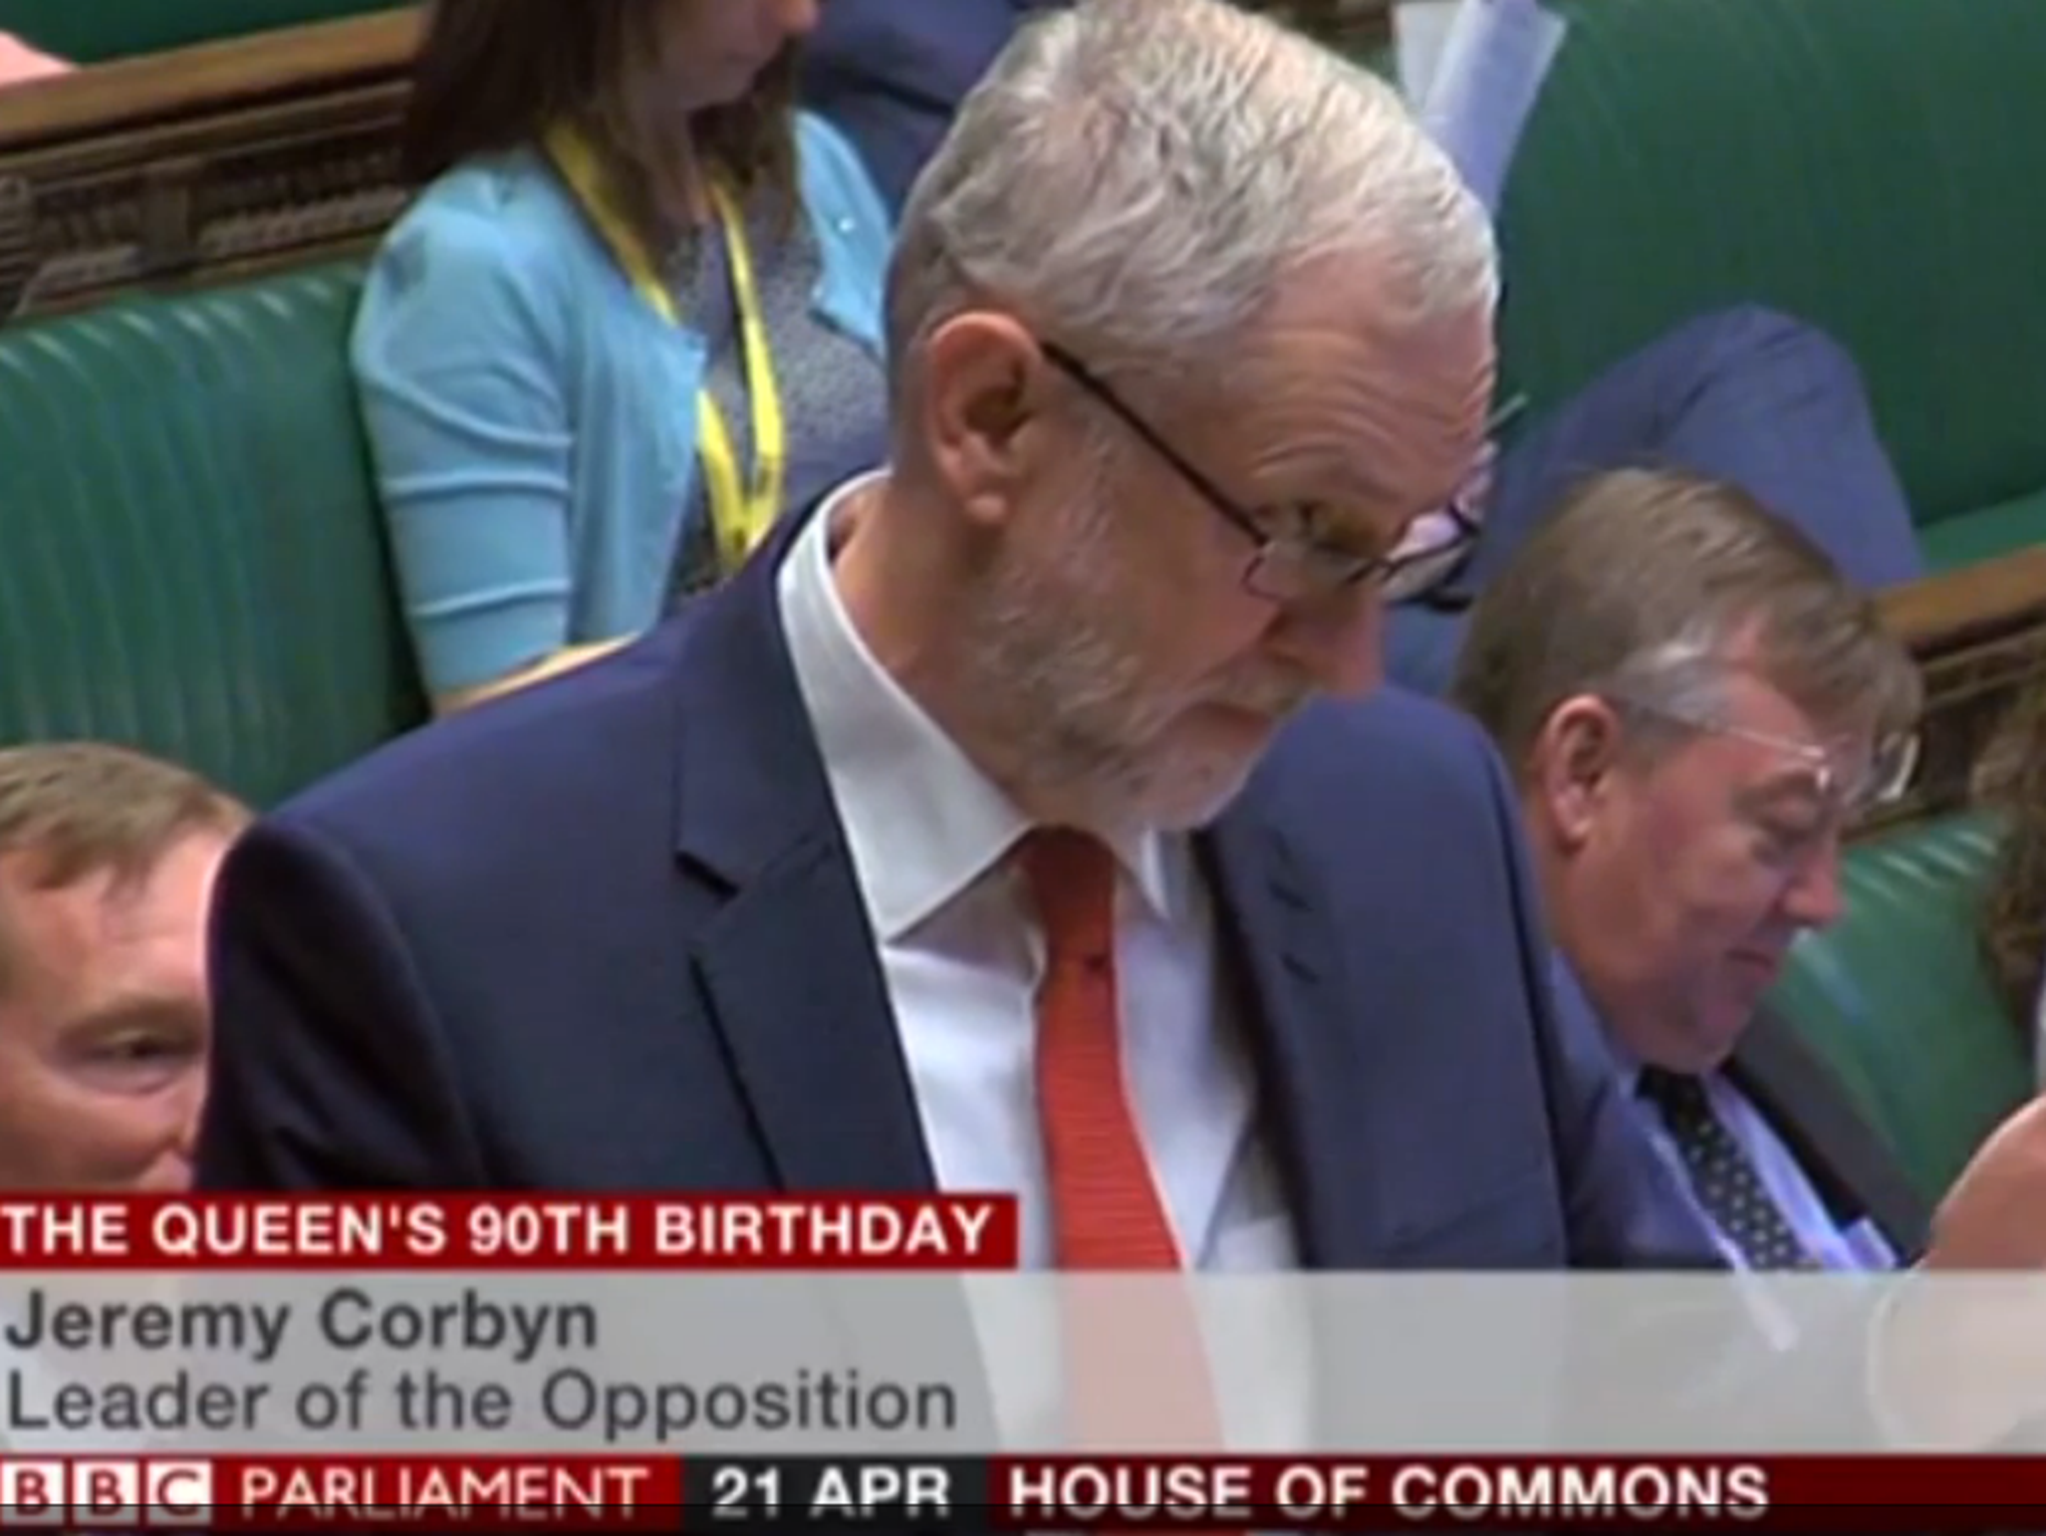 The Labour leader also joked the Queen was an avid Arsenal supporter